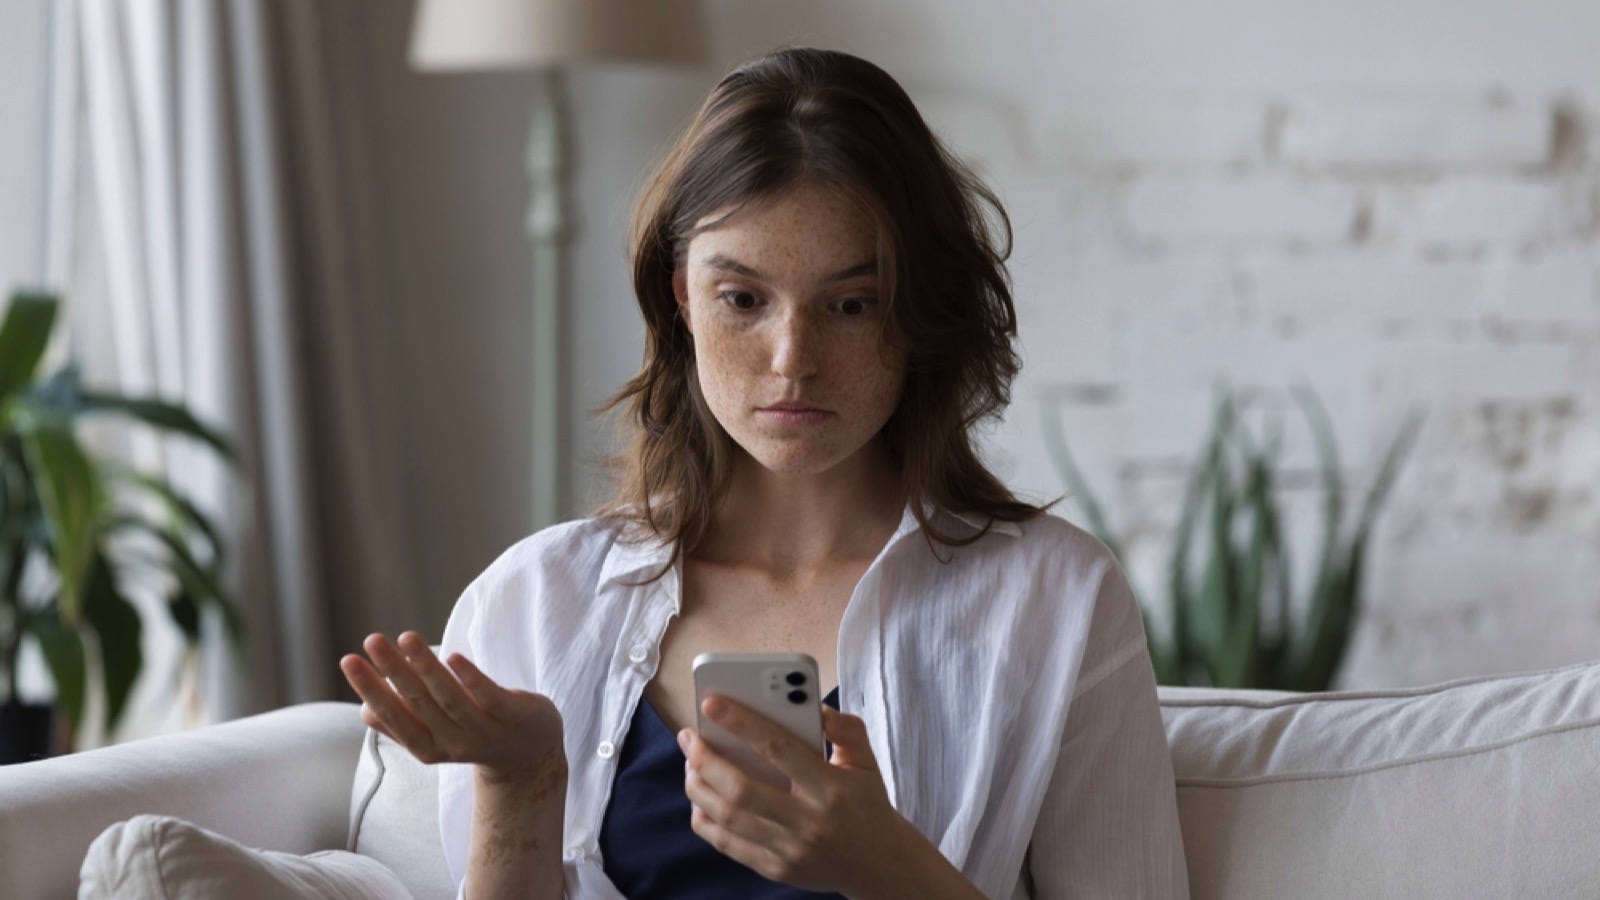 Young woman annoyed using mobile